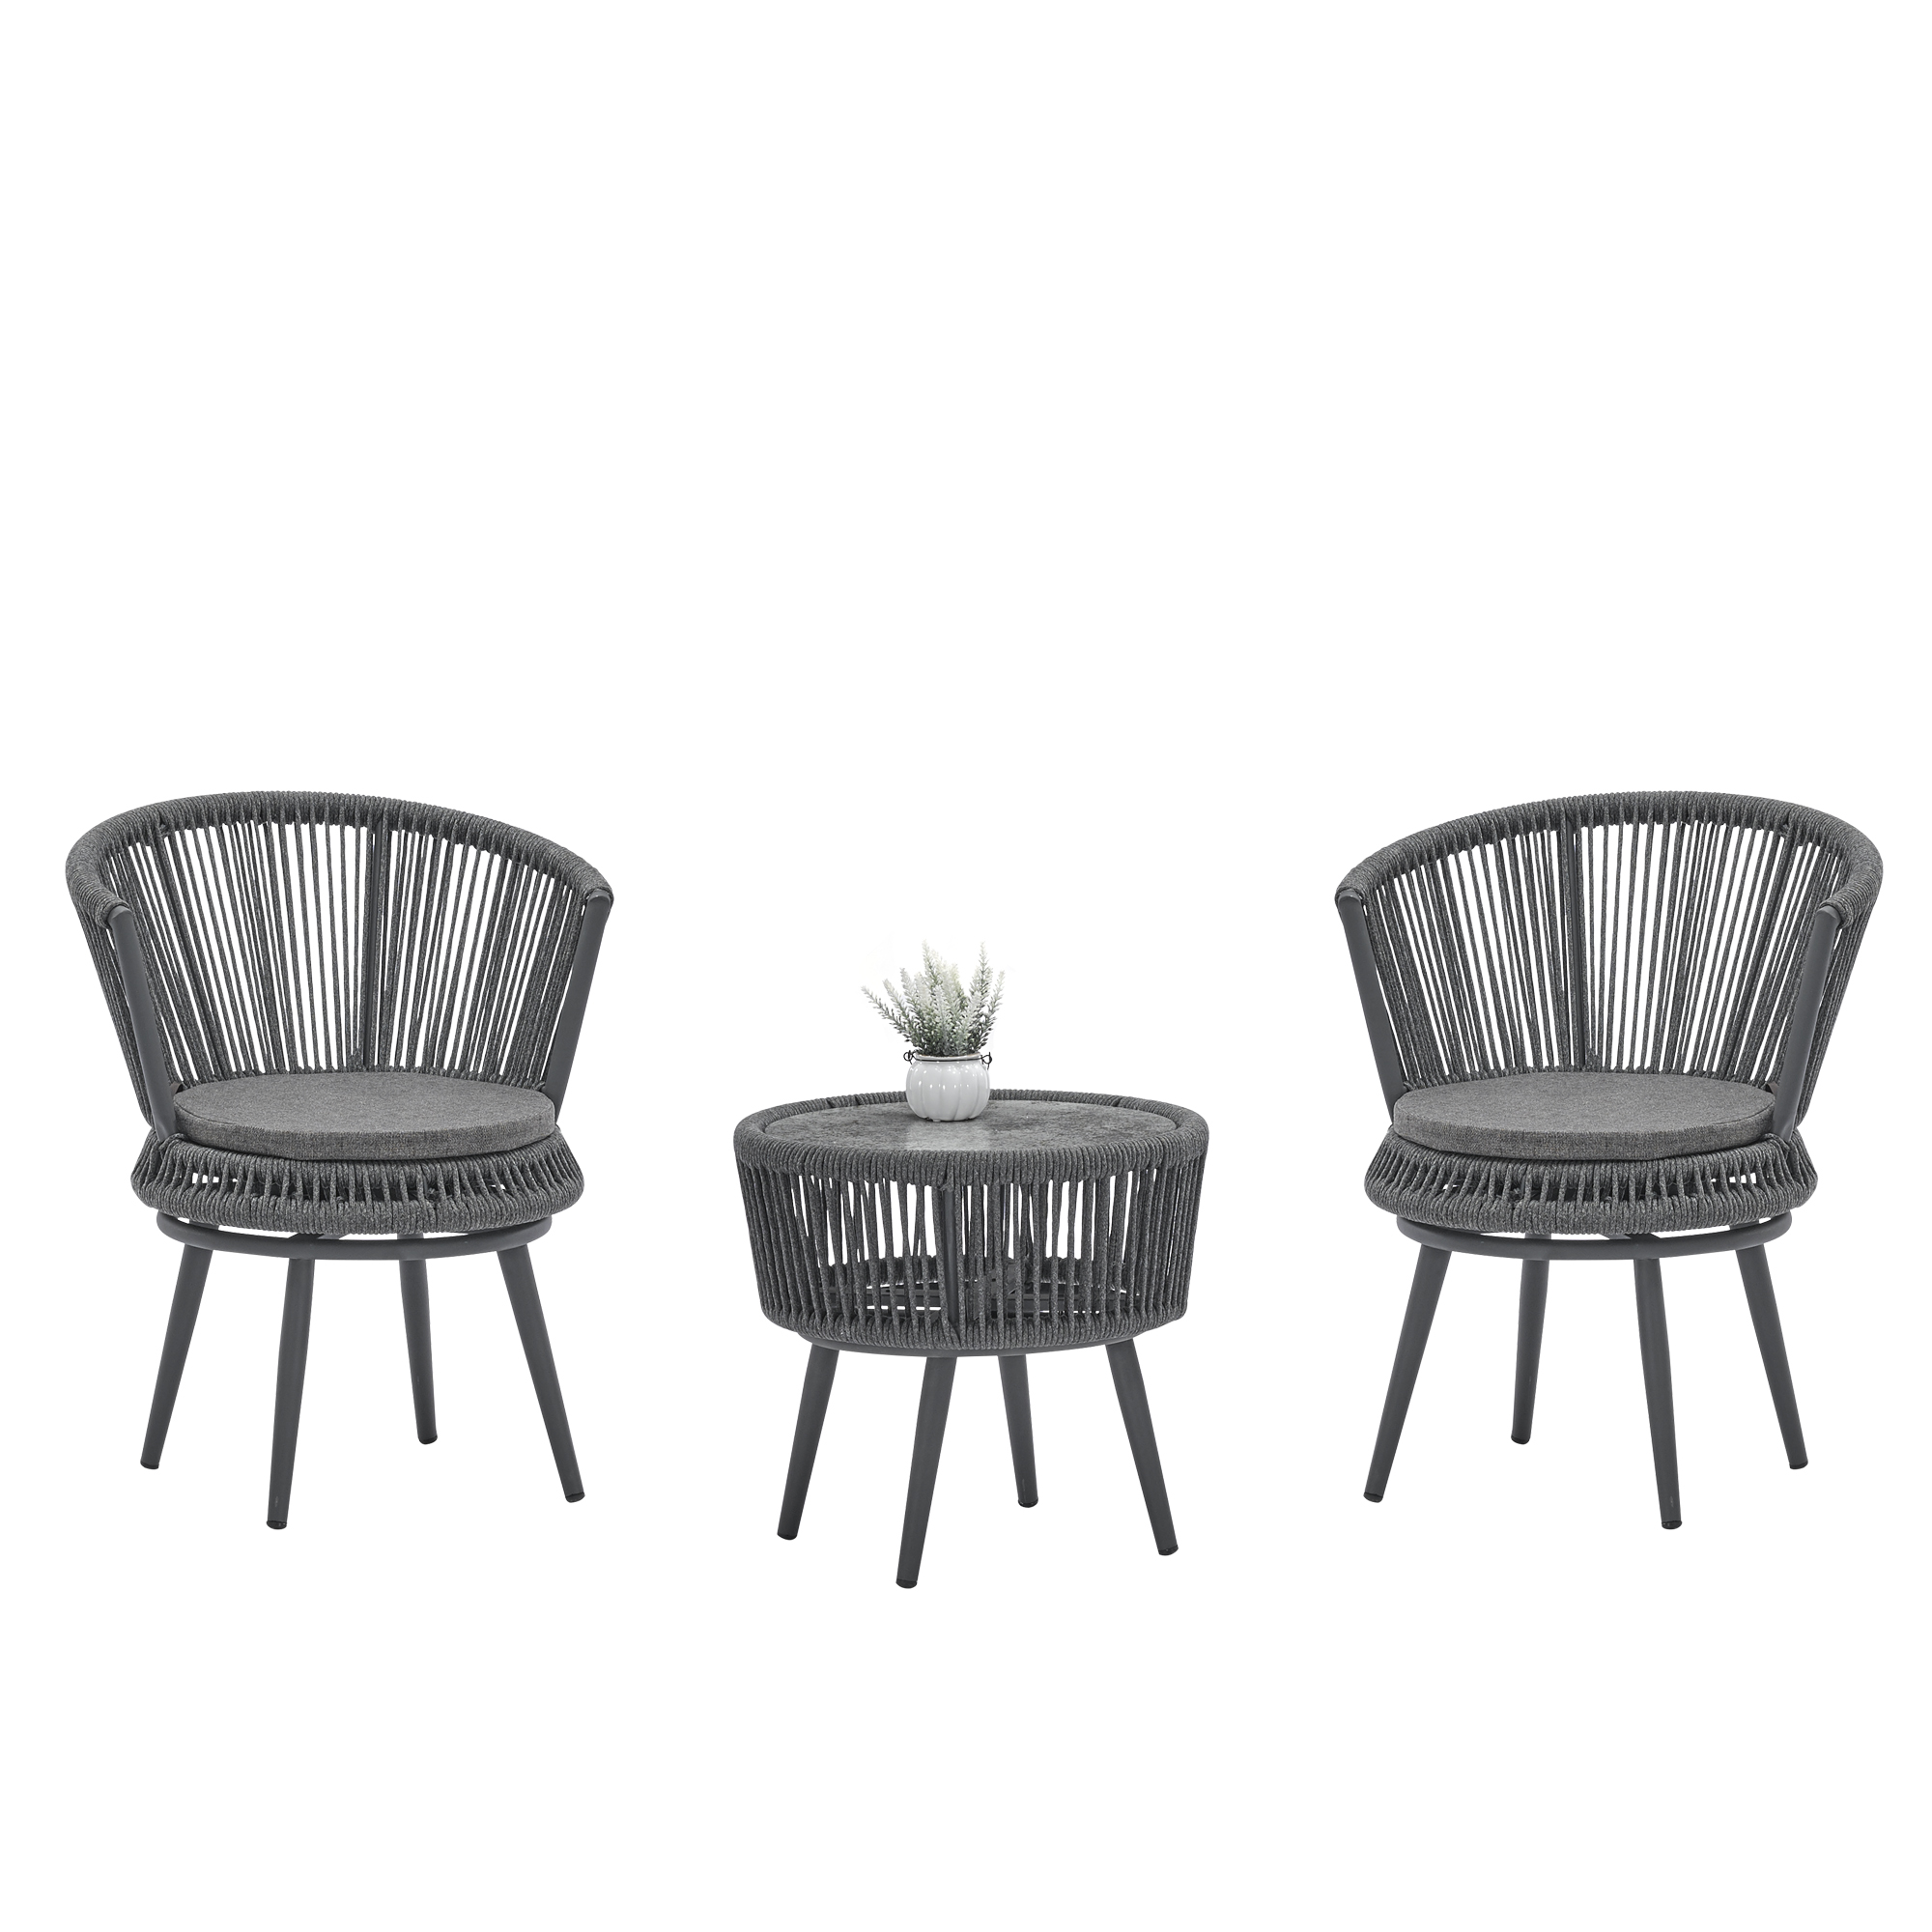 3PCS Outdoor Garden Rattan Chairs with Coffee Table, All Weather Outdoor Lounge Chair Chat Conversation Set for Garden, Backyard, Pool, Balcony - Dark Gray - image 3 of 8